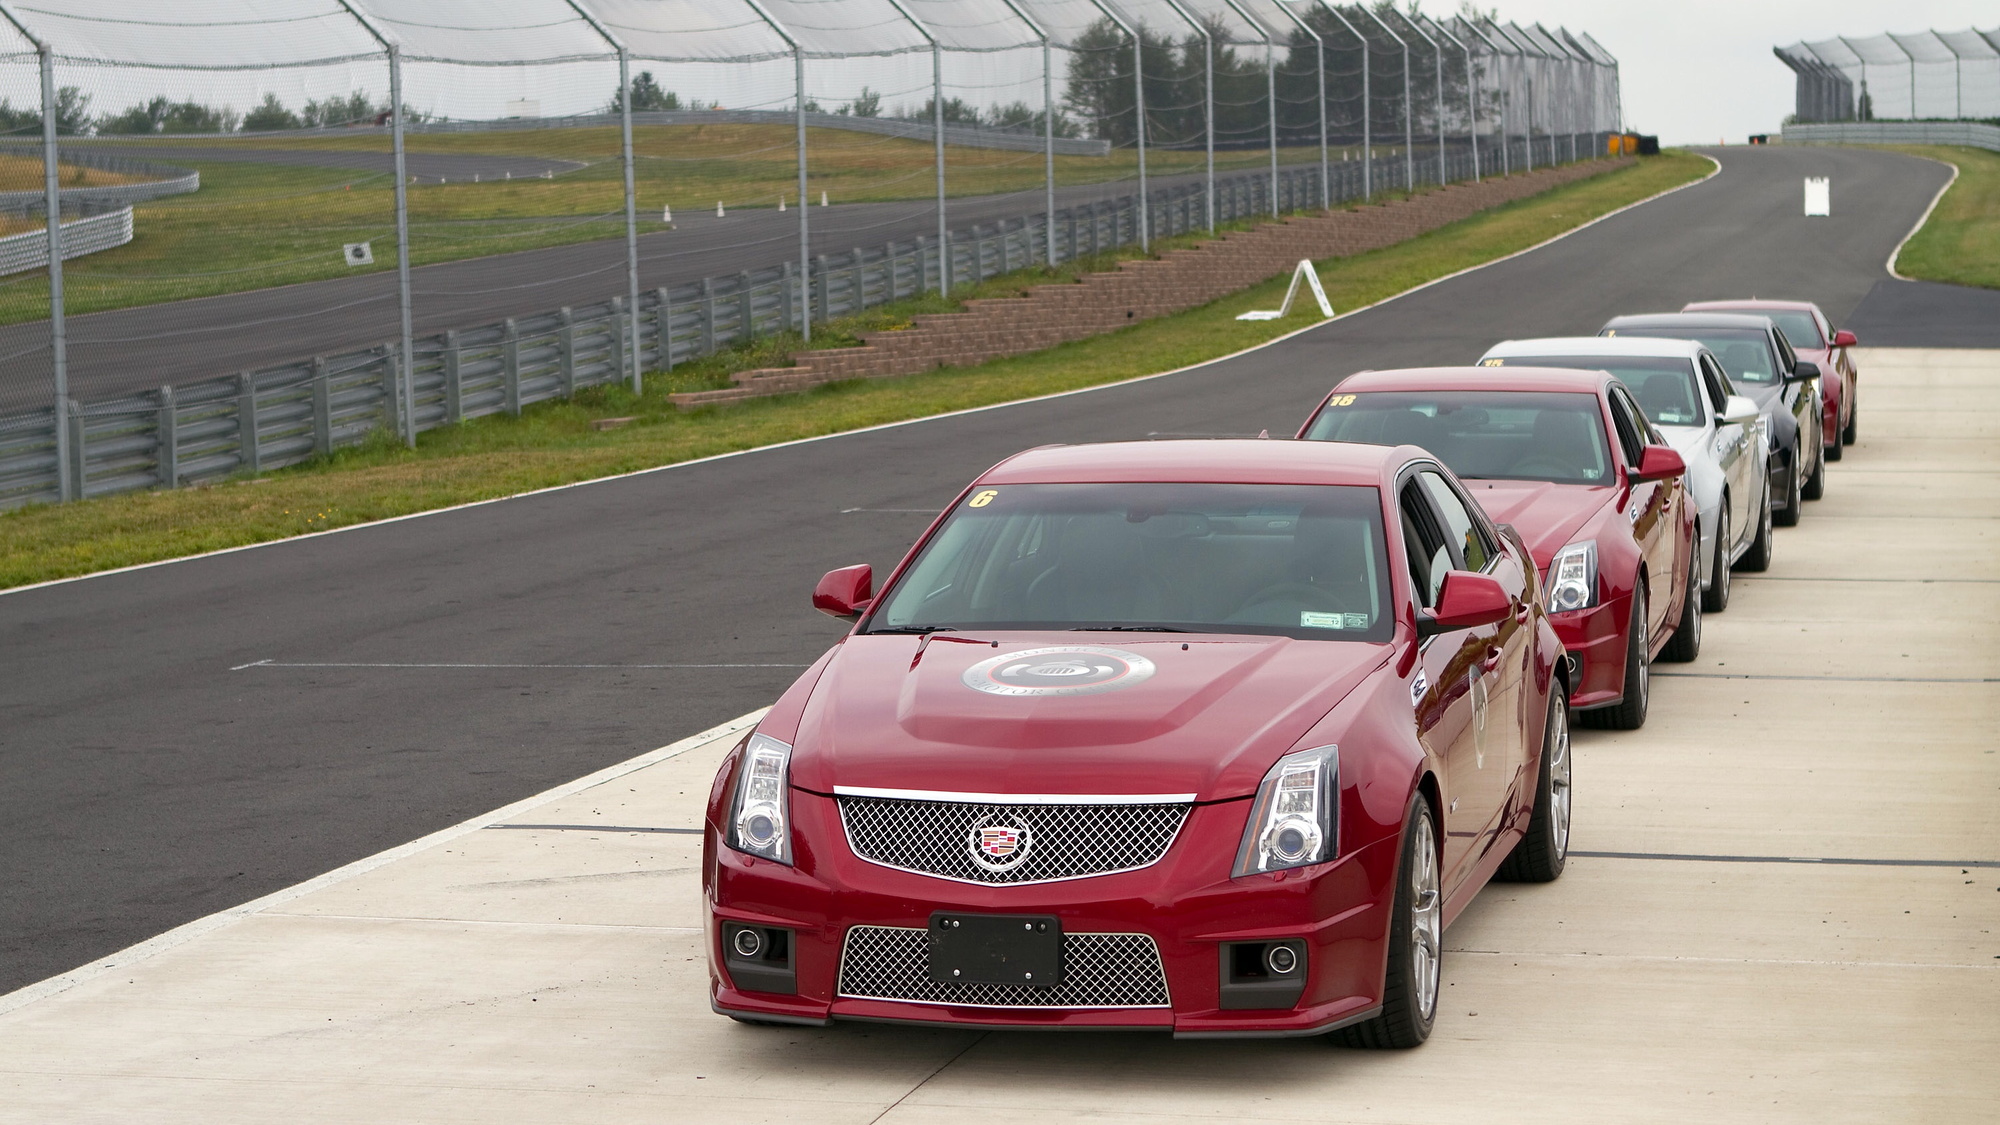 2011 Cadillac CTS-V Coupe at Monticello Motor Club